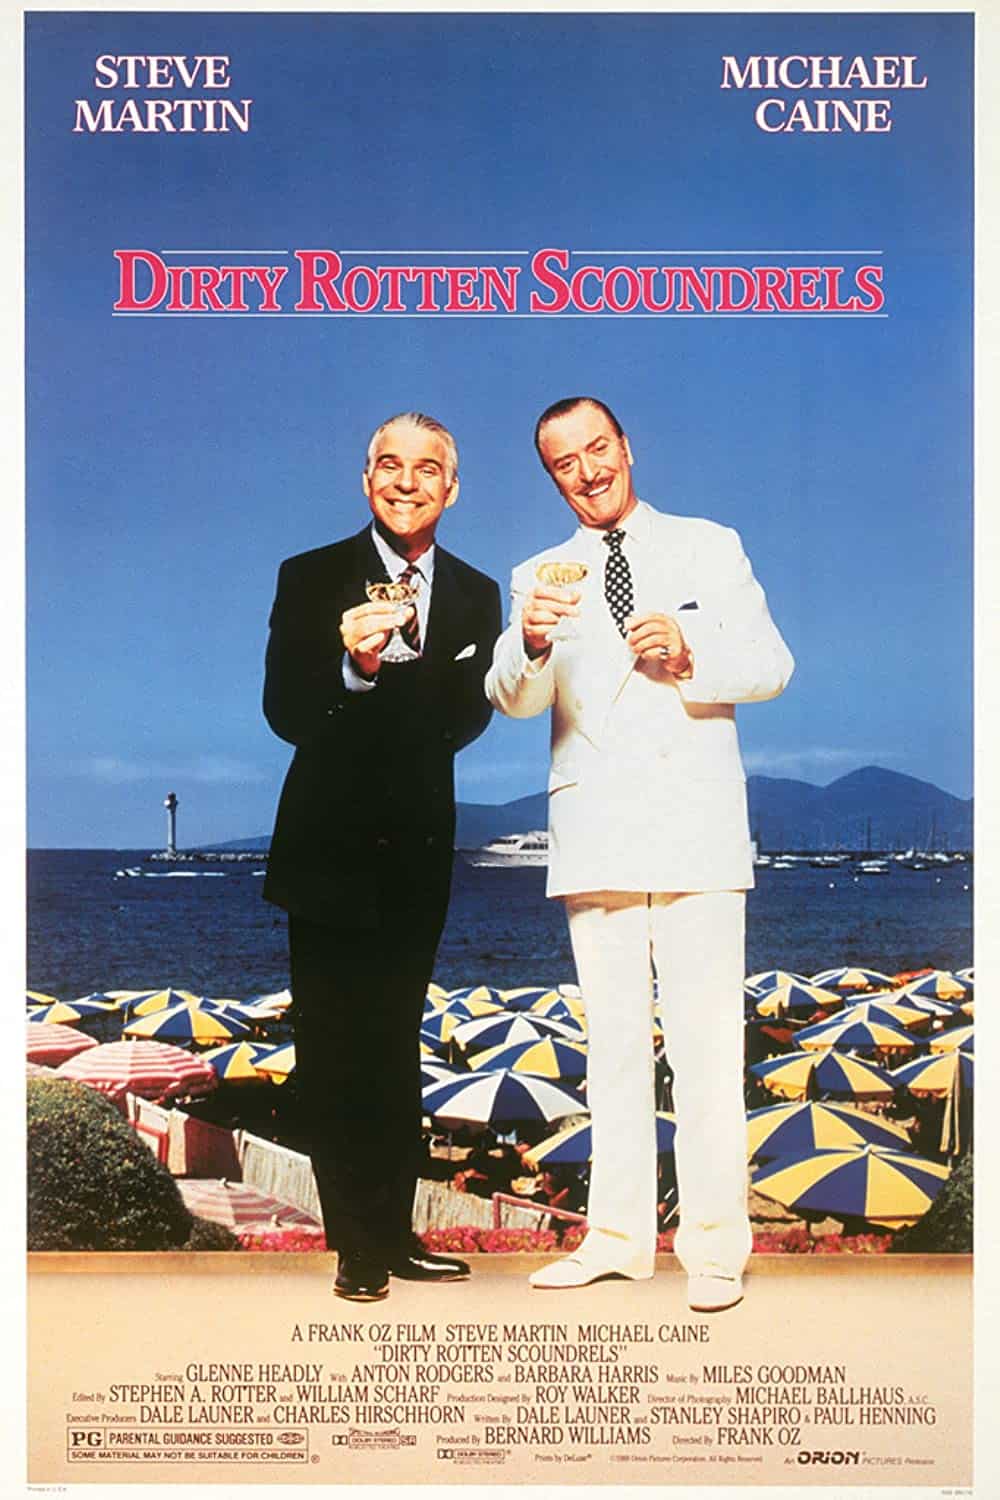 Dirty Rotten Scoundrels (1988) 15 Best Con Movies to Add in Your Watchlist